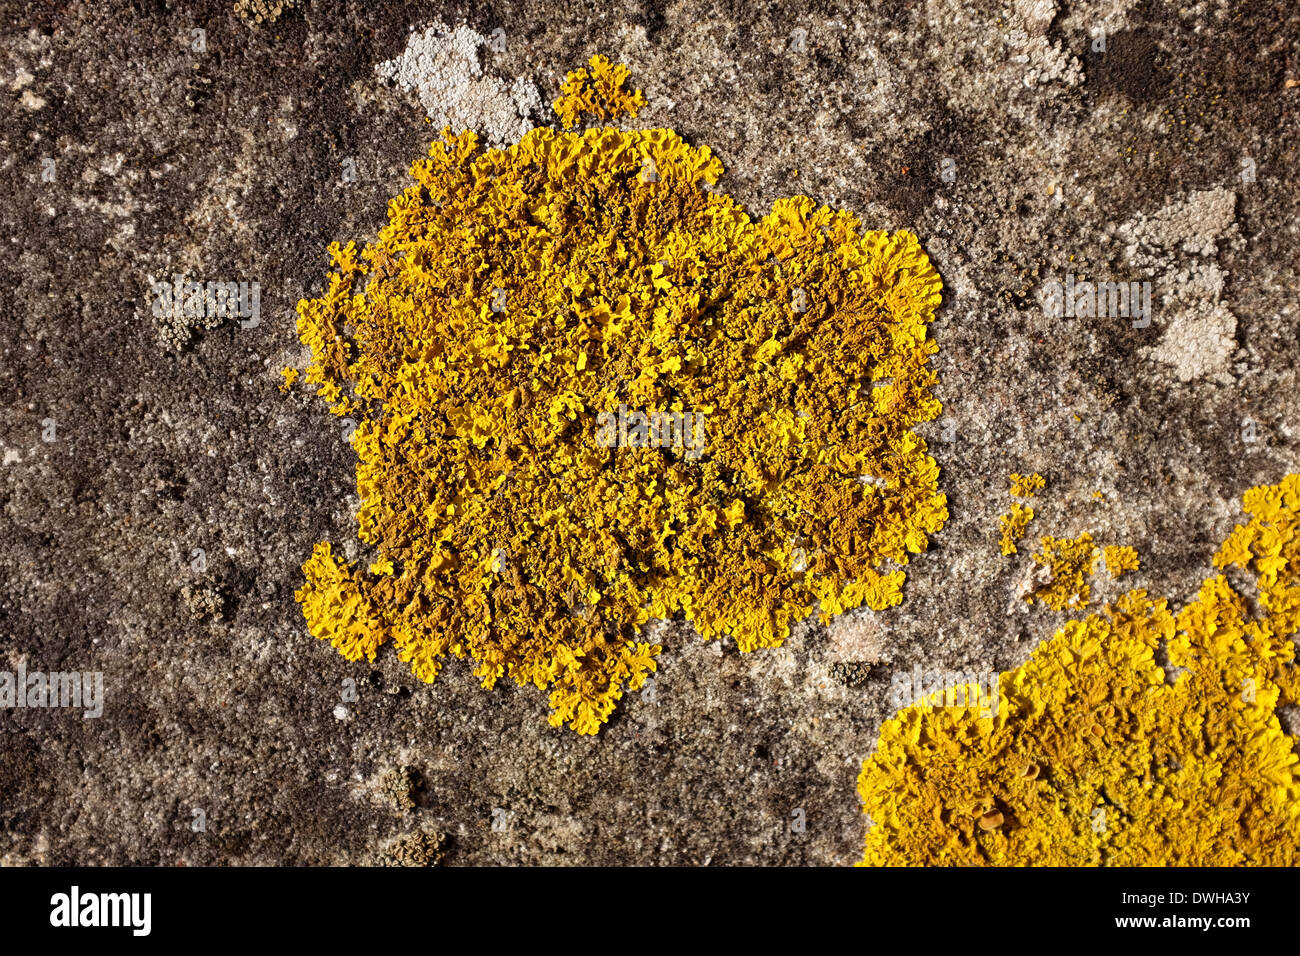 Detail of yellow crustose lichen growing on concrete Stock Photo